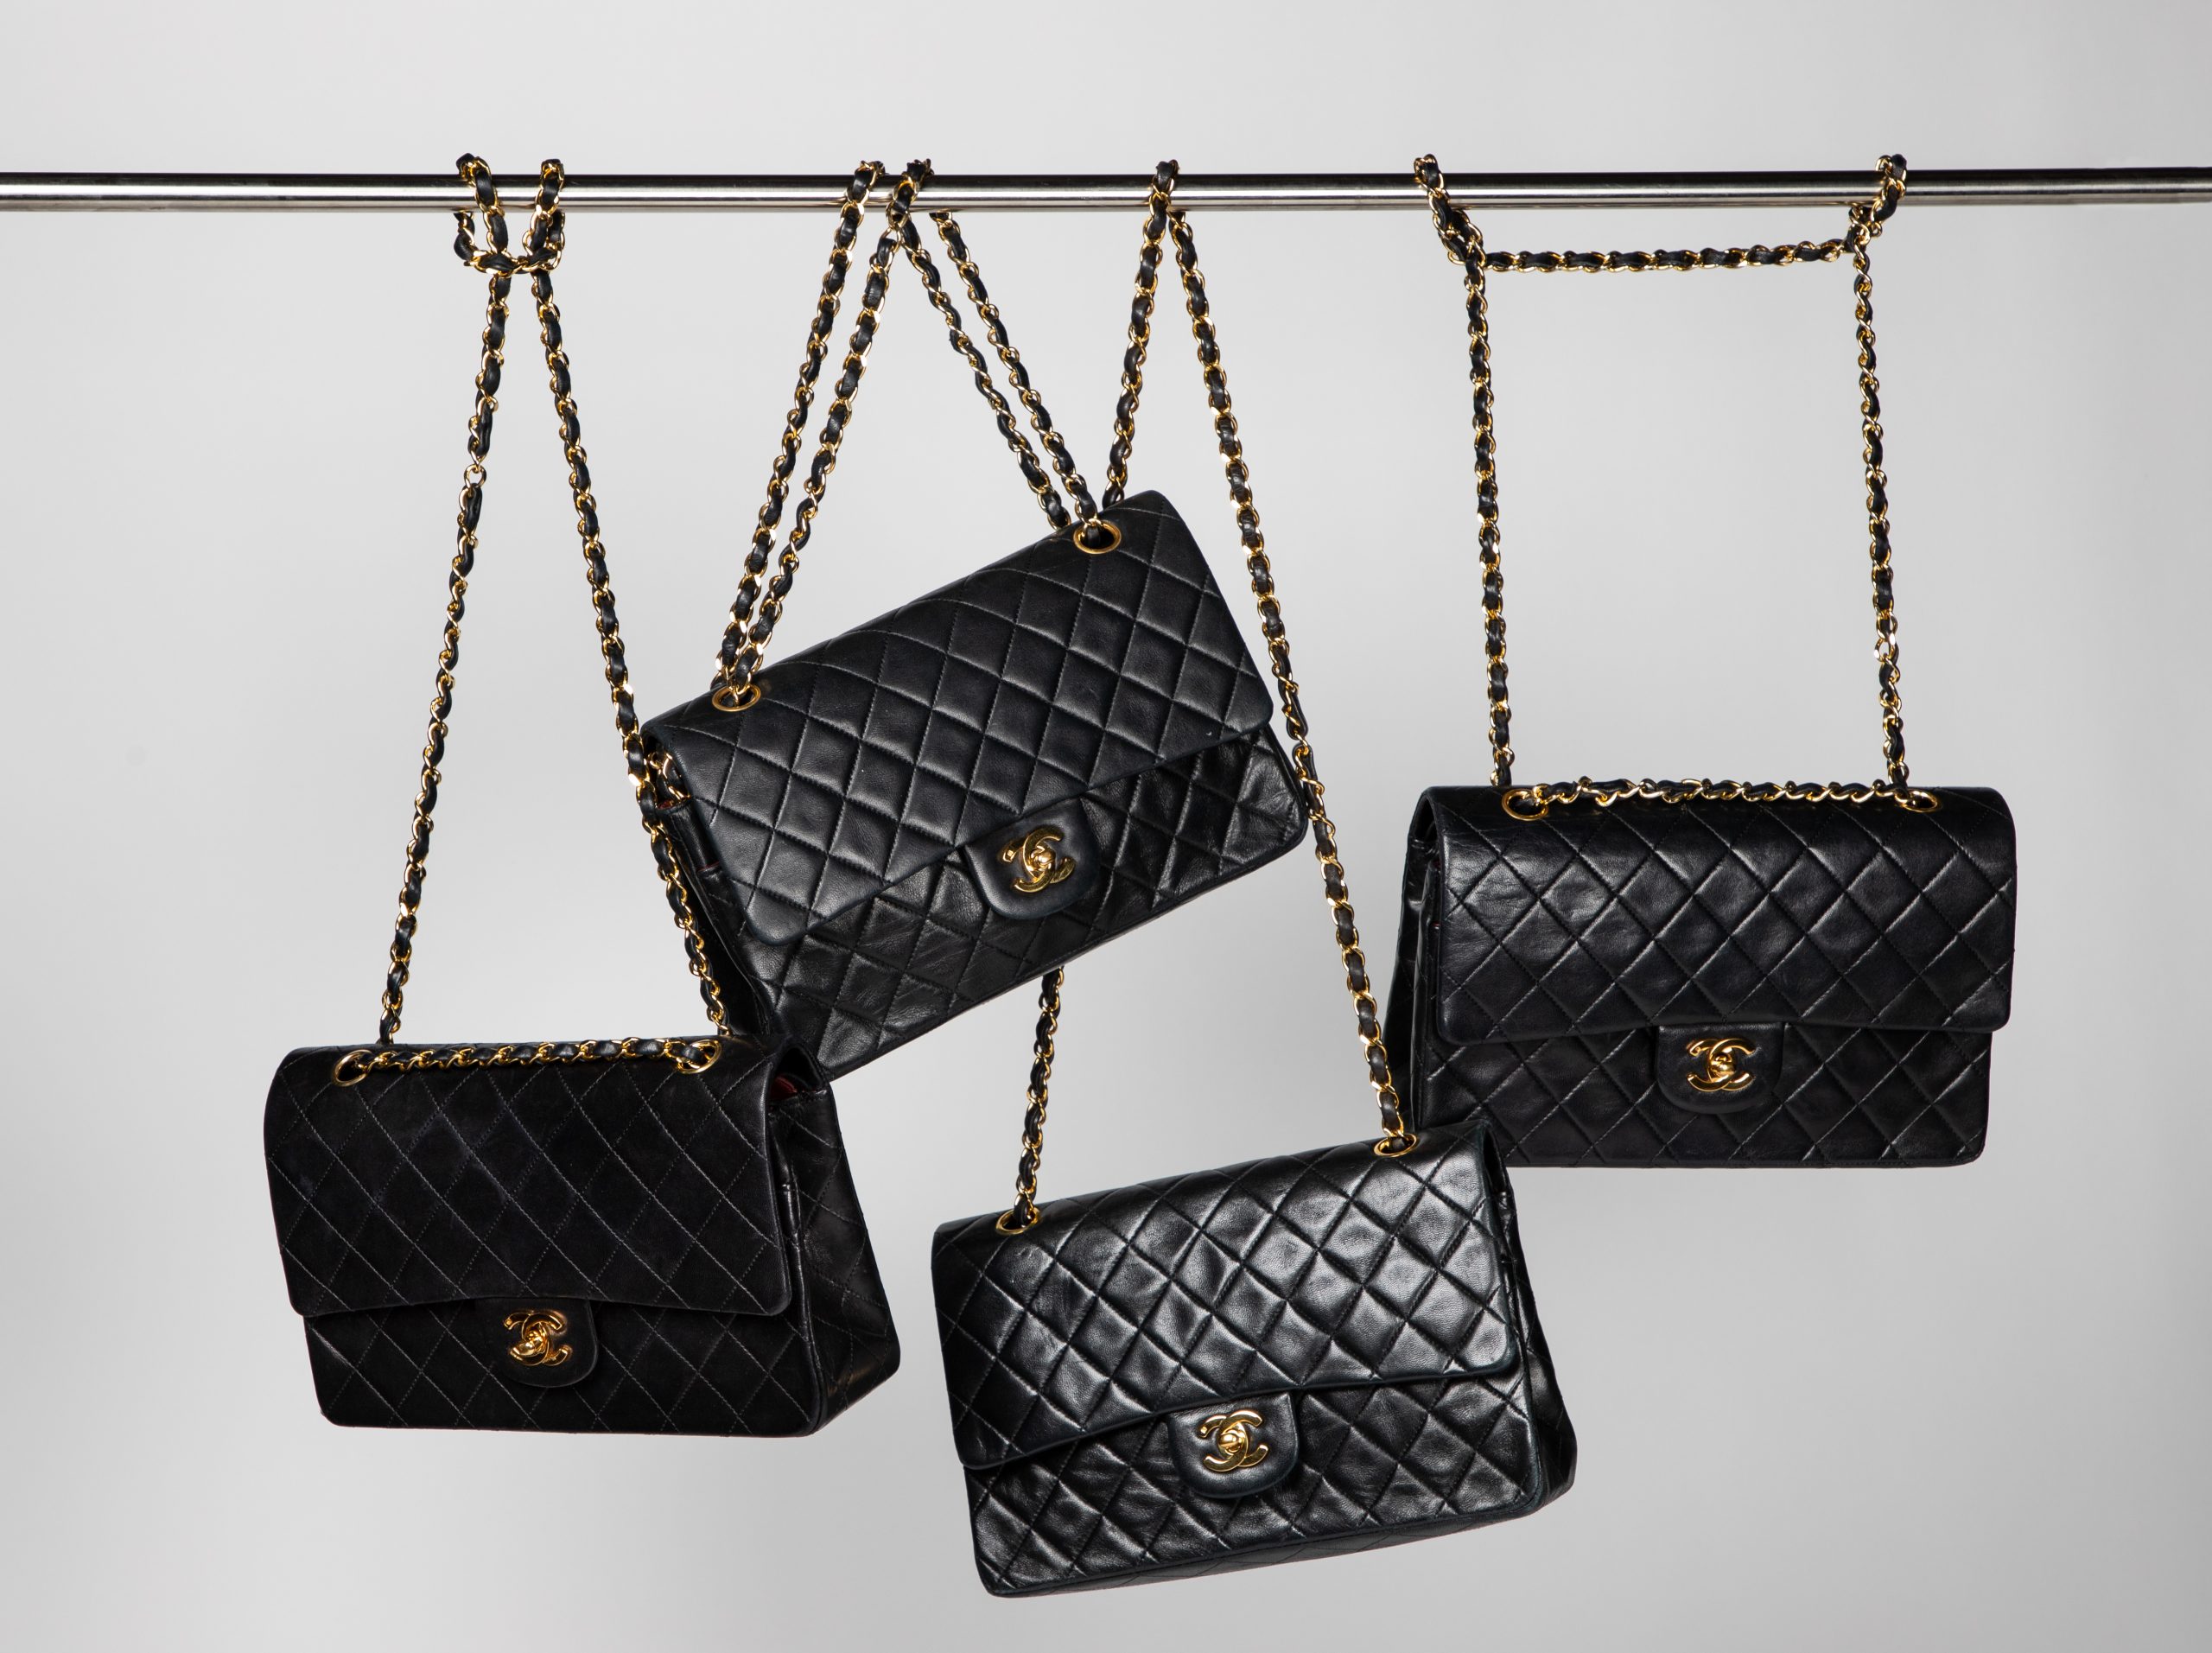 Chanel bags : a timeless investment